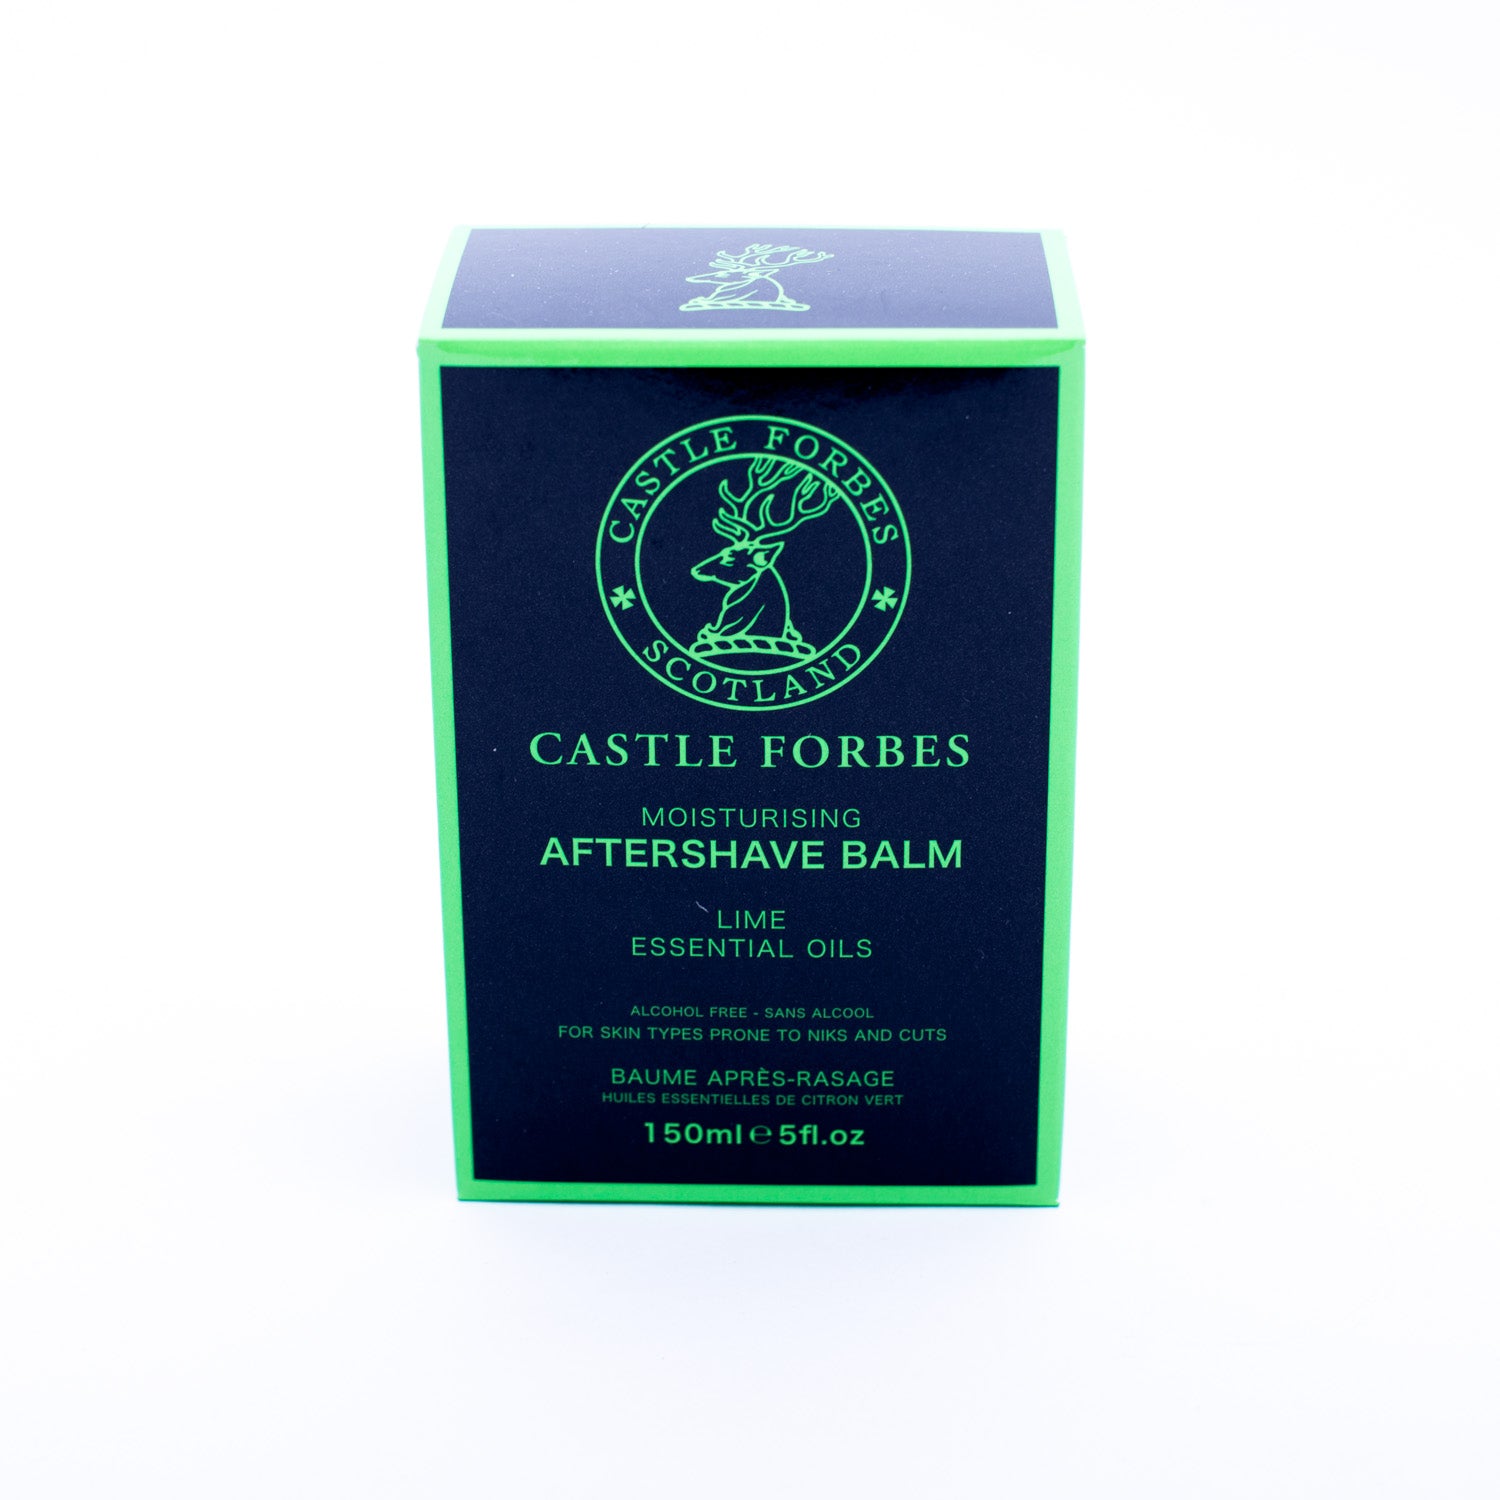 Castle Forbes Lime Essential Aftershave Balm produced by KirbyAllison.com.